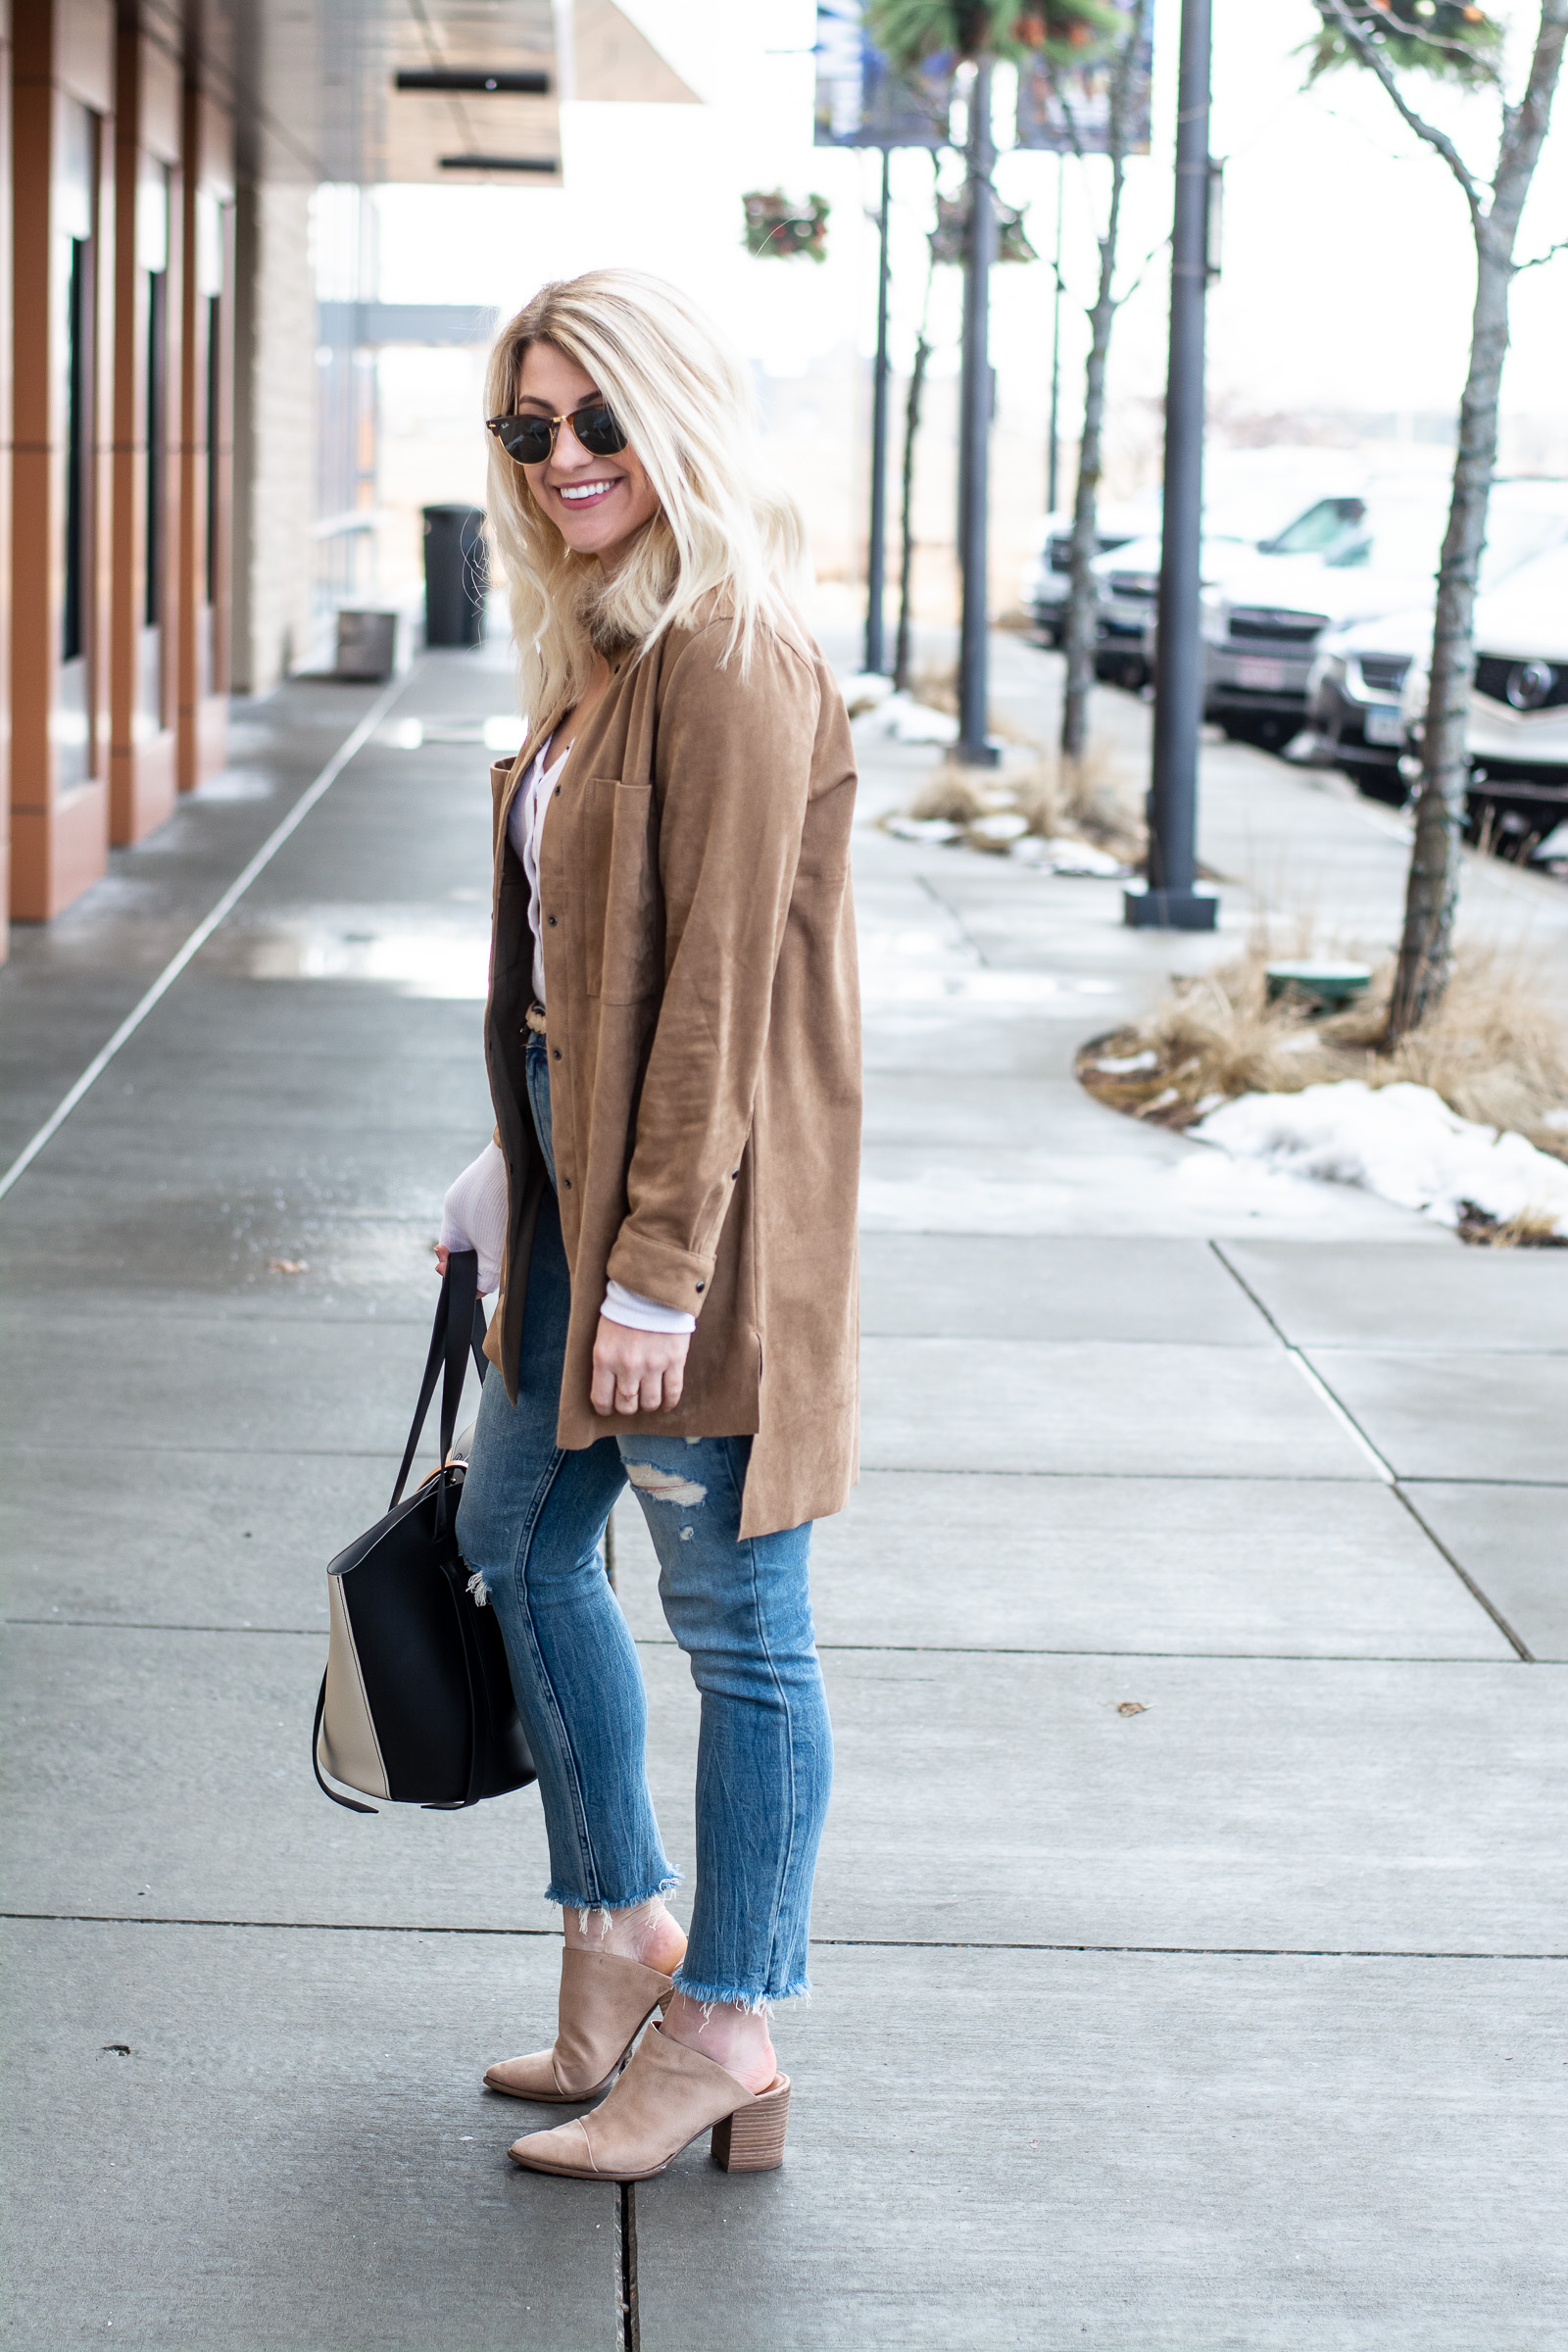 A Dress as a Jacket with Girlfriend Jeans. | Le Stylo Rouge